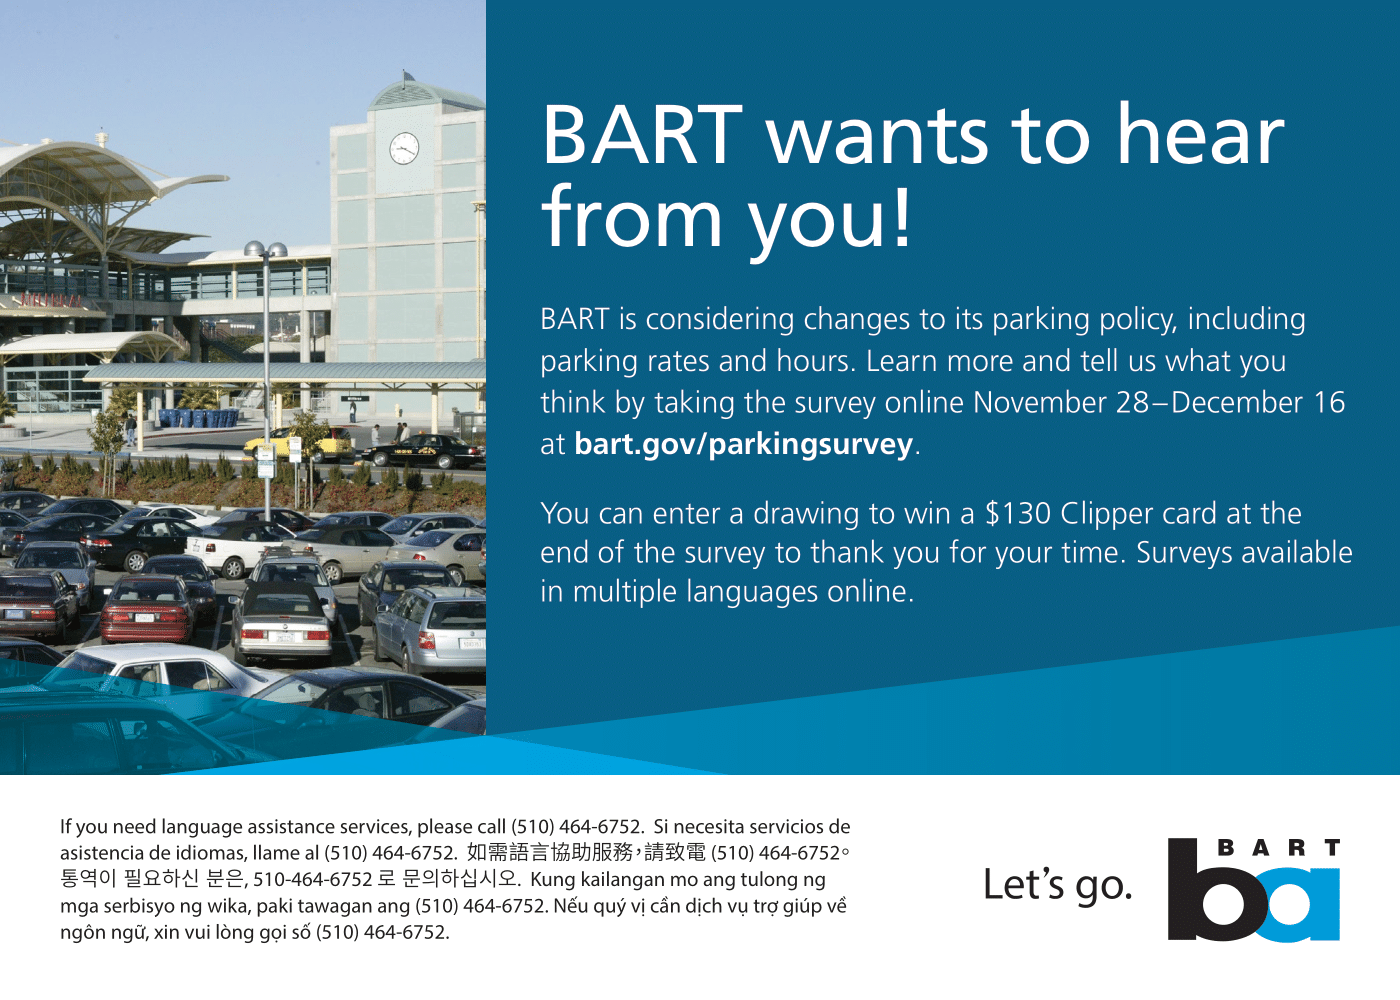 BART wants to hear from you! Take the parking survey